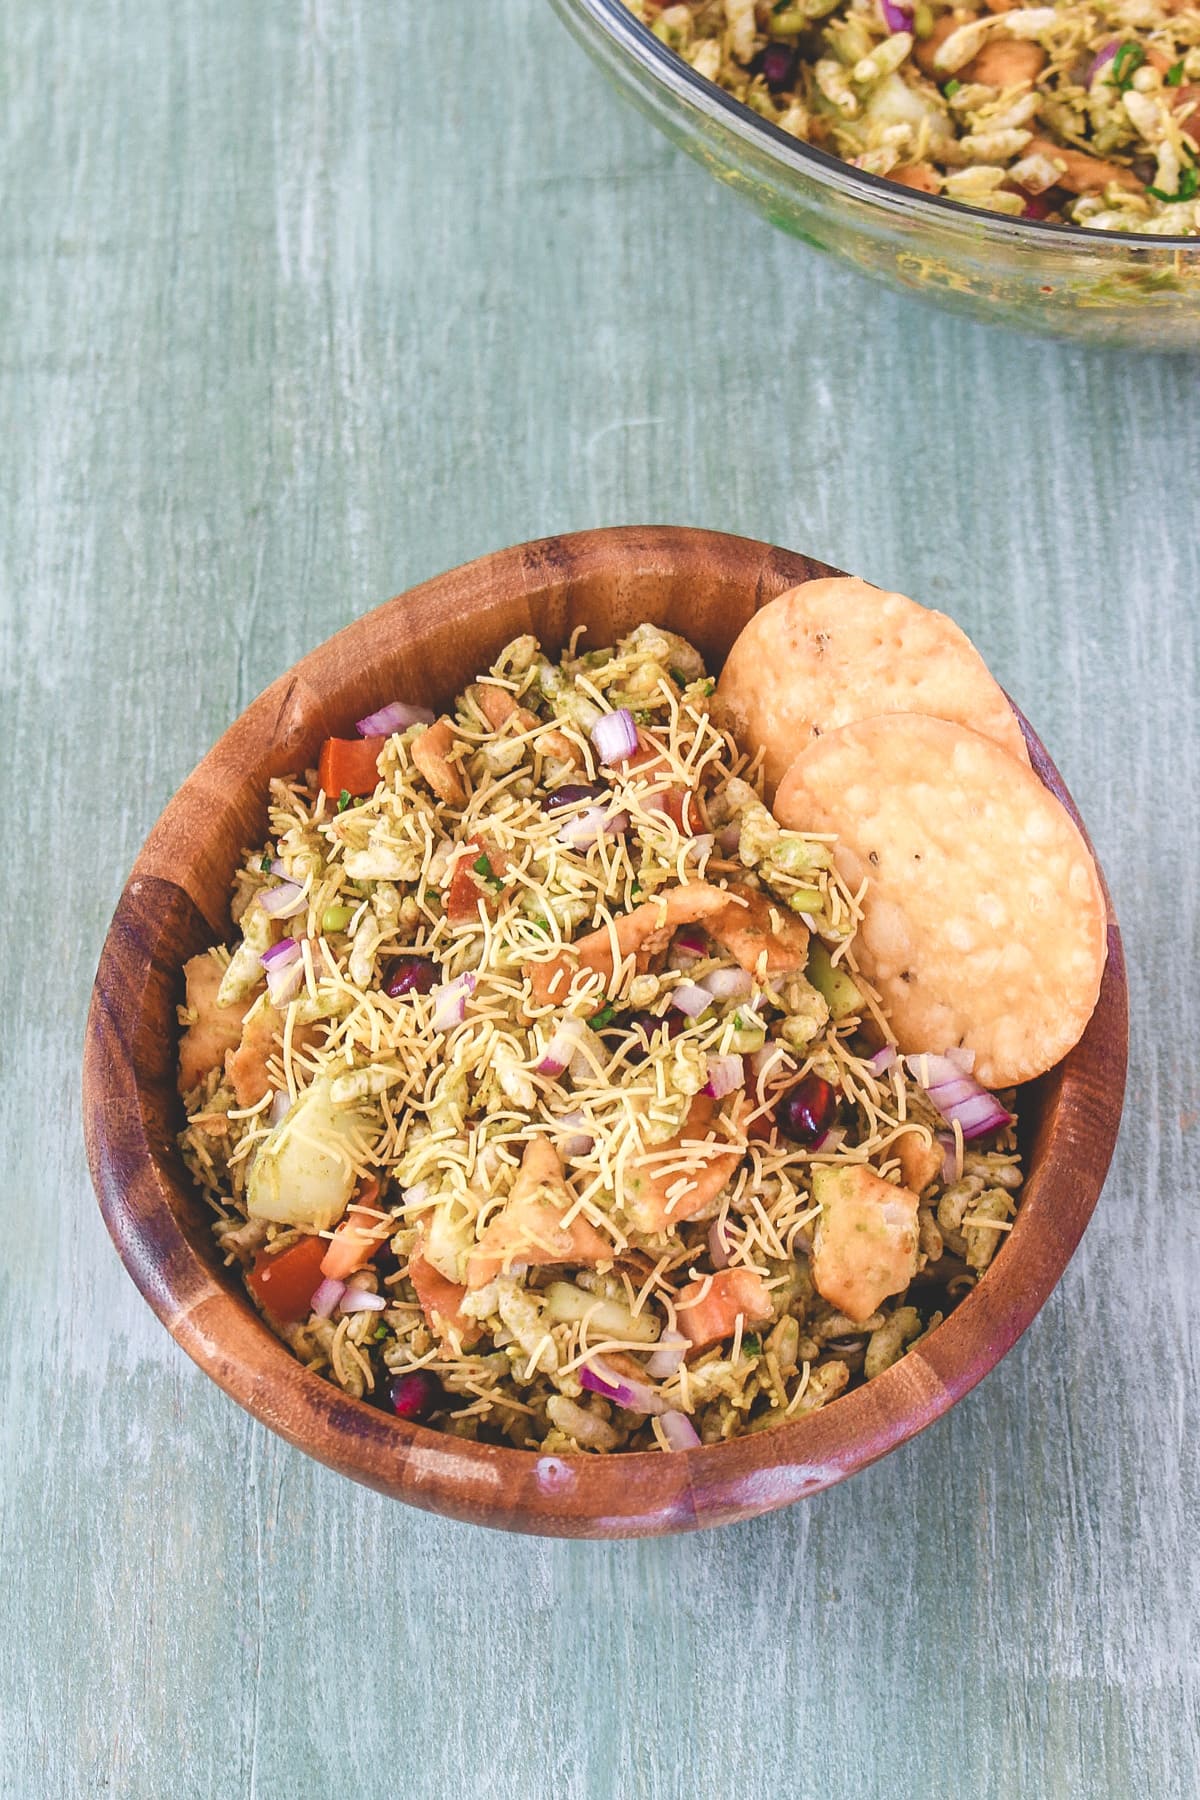 Bhel puri served with 2 papdi on the side.